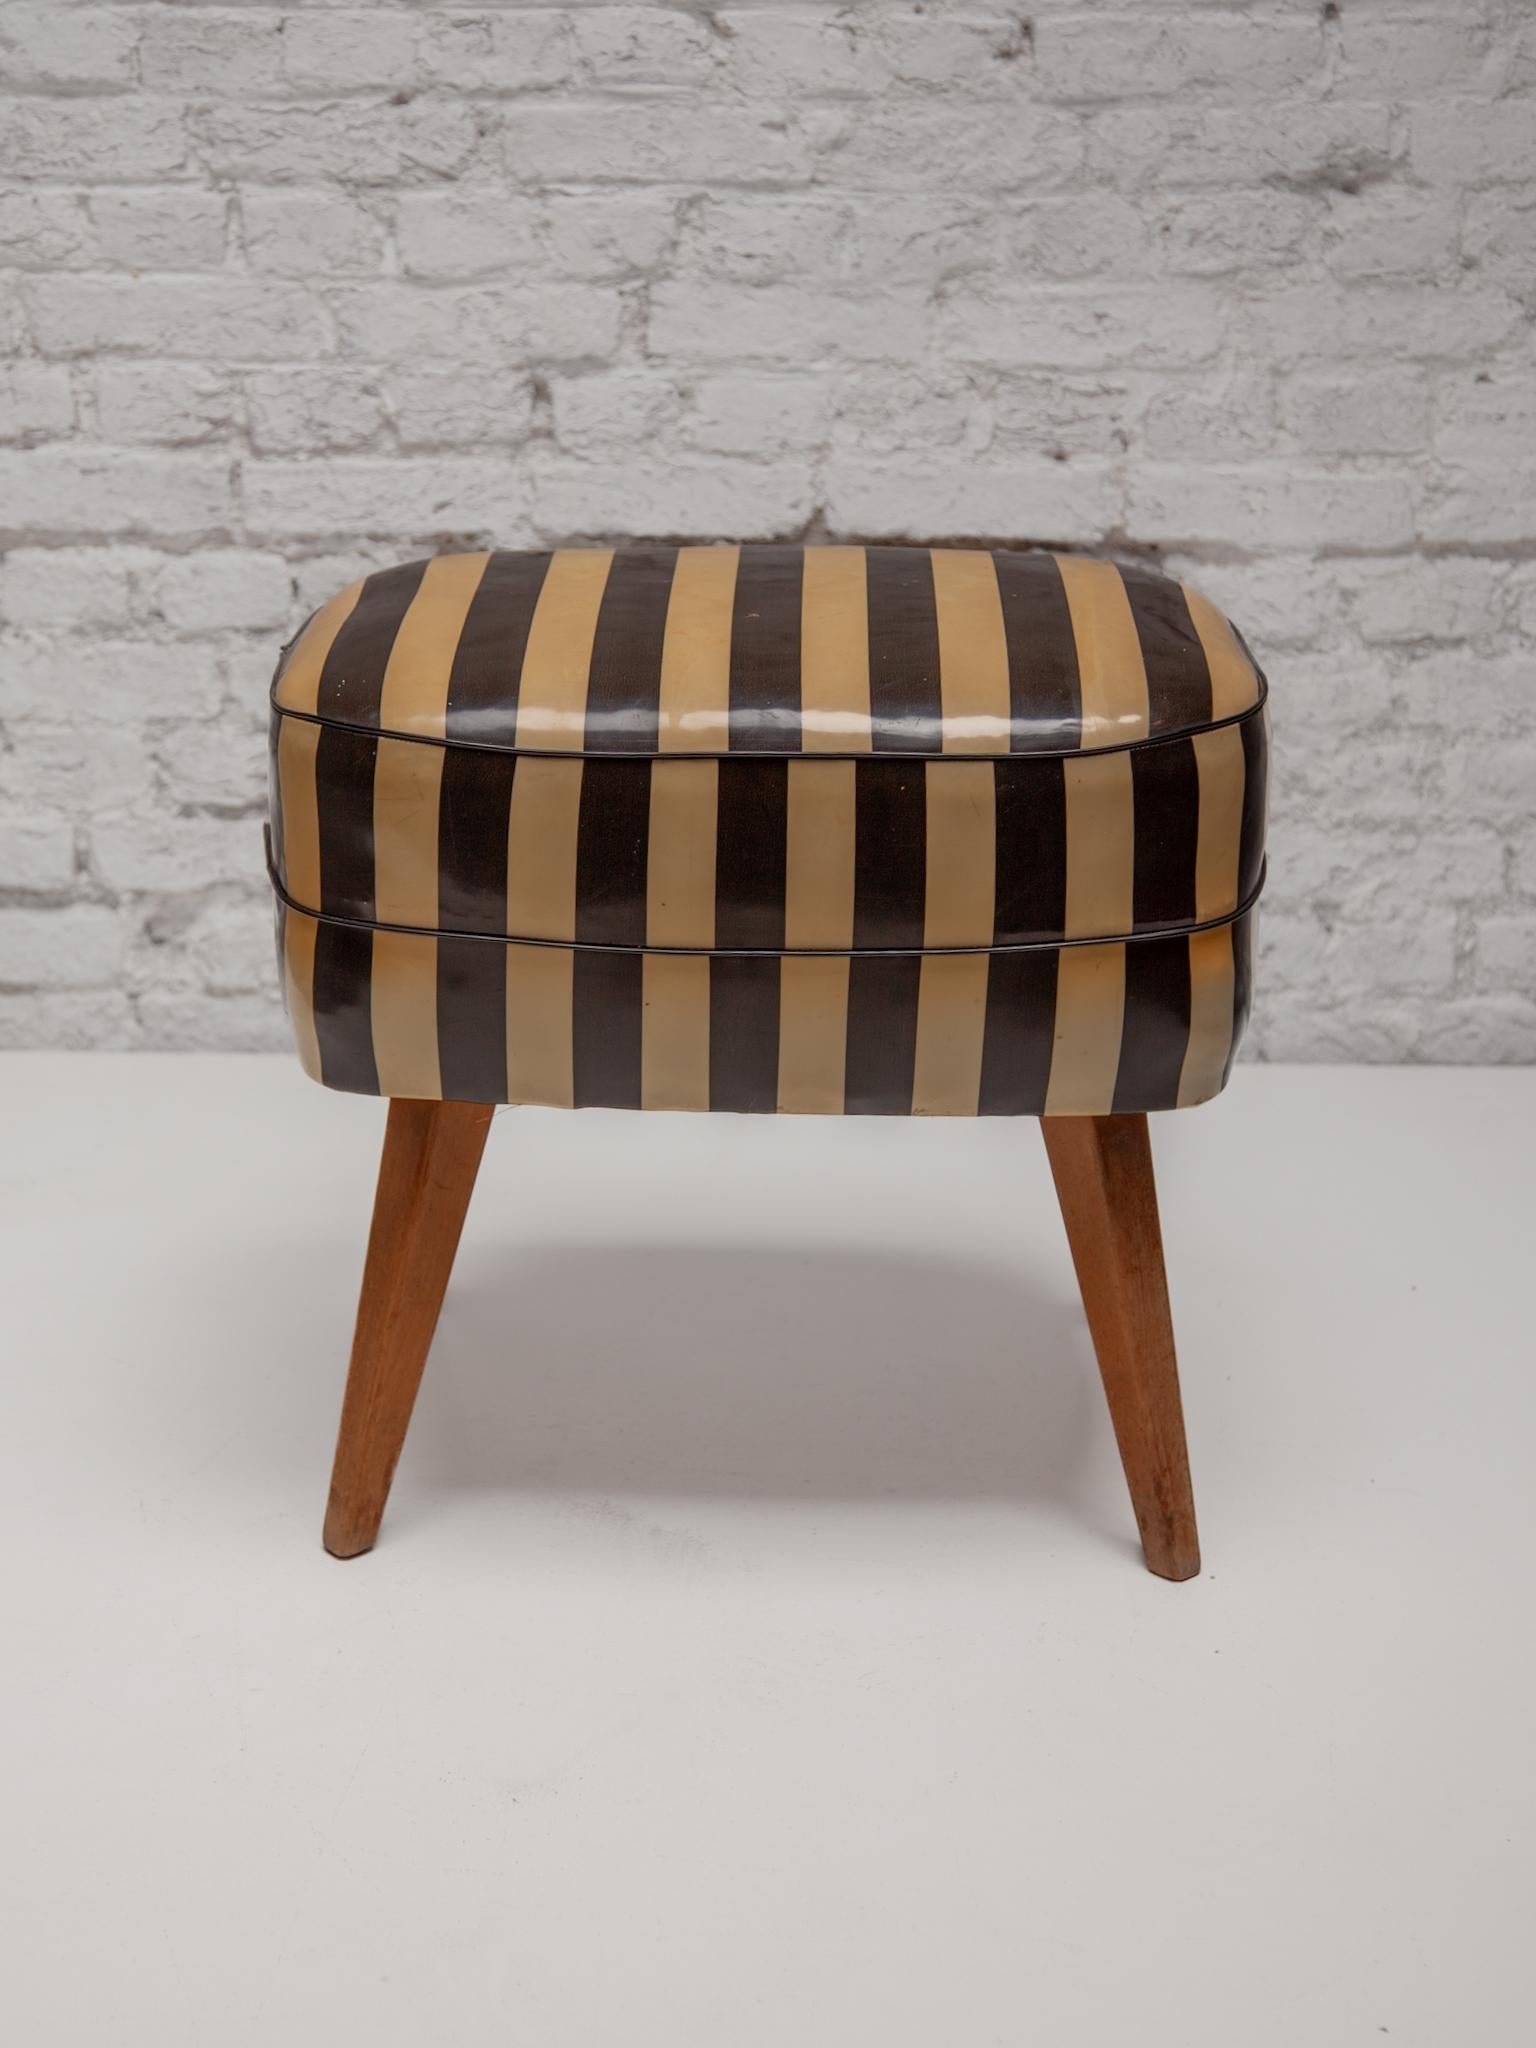 Hand-Crafted Antique Square Ottoman, Stool Black and White Seat, France 1910 For Sale